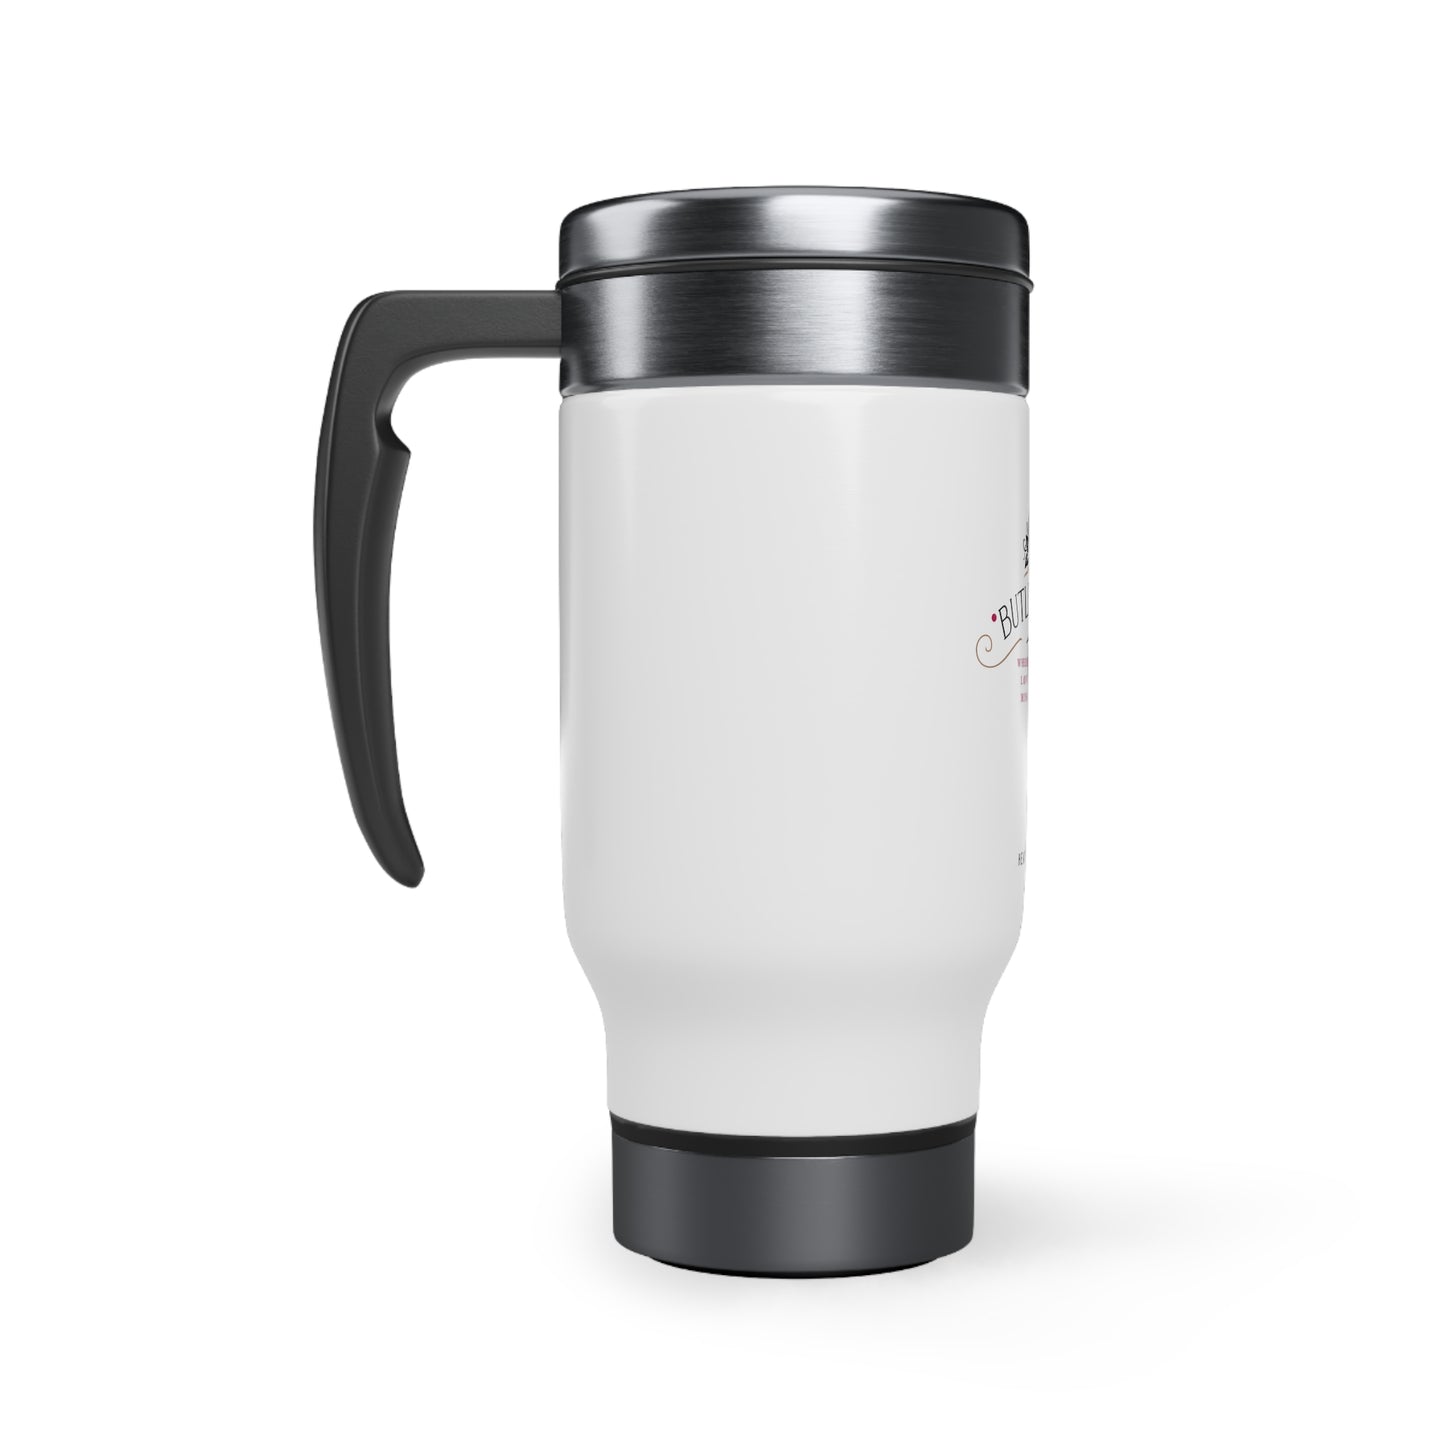 Butler Ranch Stainless Steel Travel Mug with Handle, 14oz